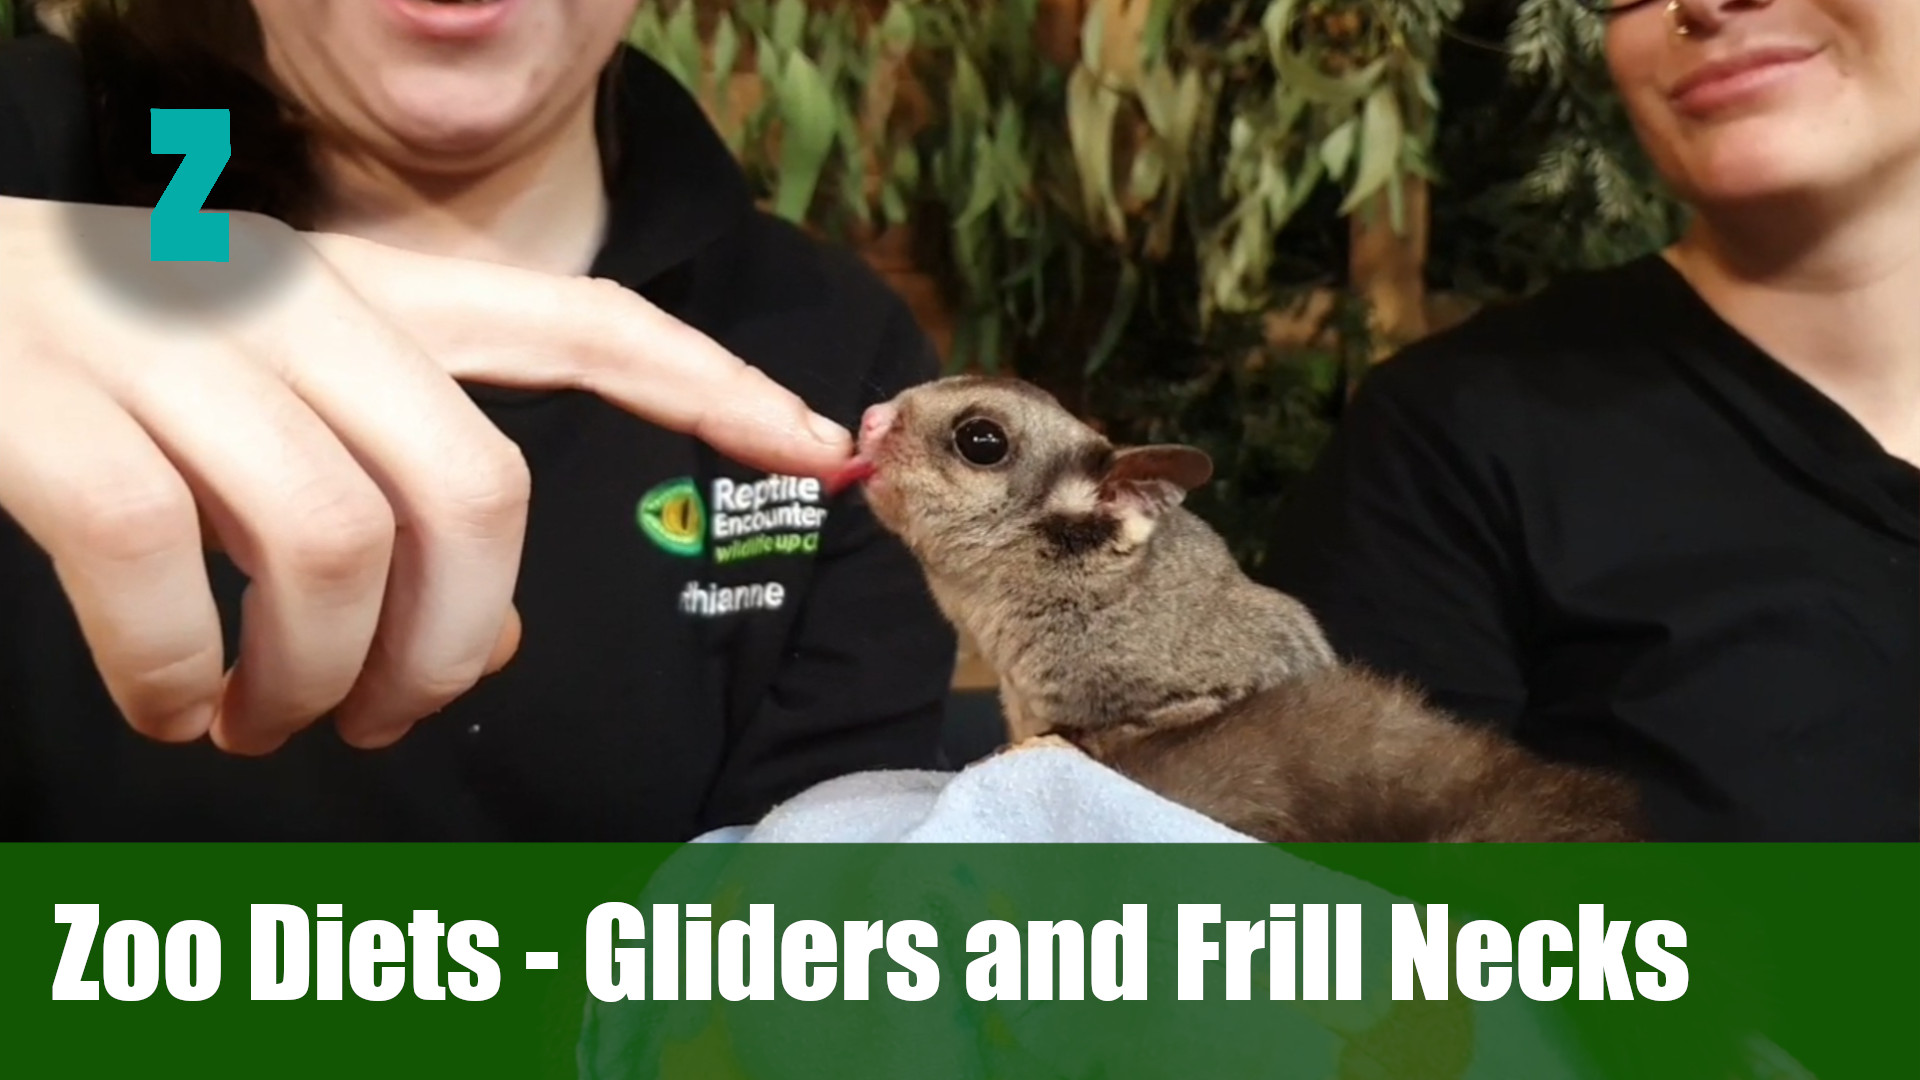 Zoo diets - Gliders and Frill Neck Lizards